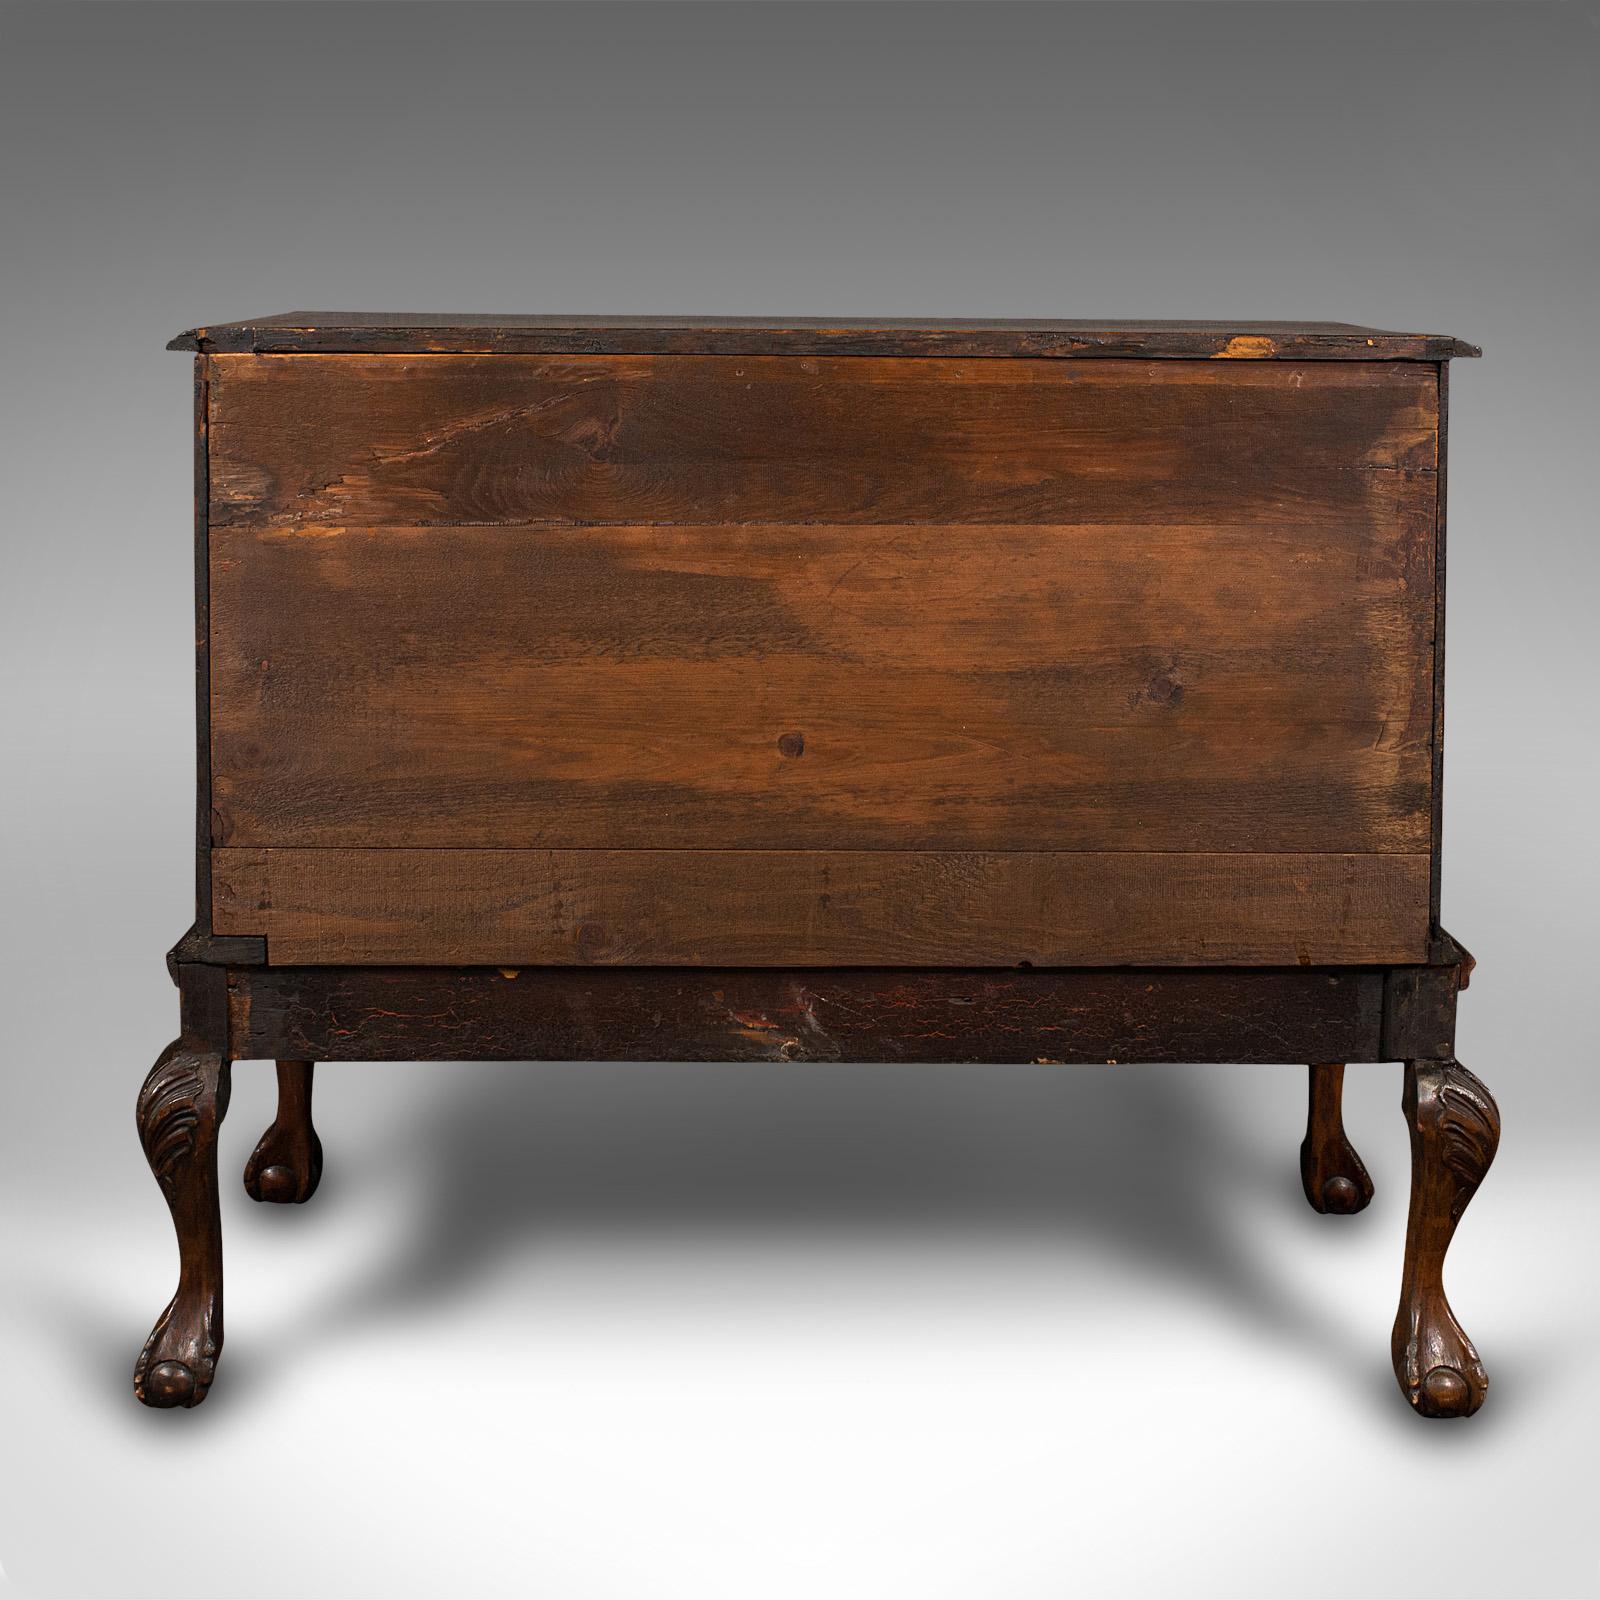 British Antique Chest on Stand, English, Lowboy, Chest of Drawers, Victorian, Circa 1870